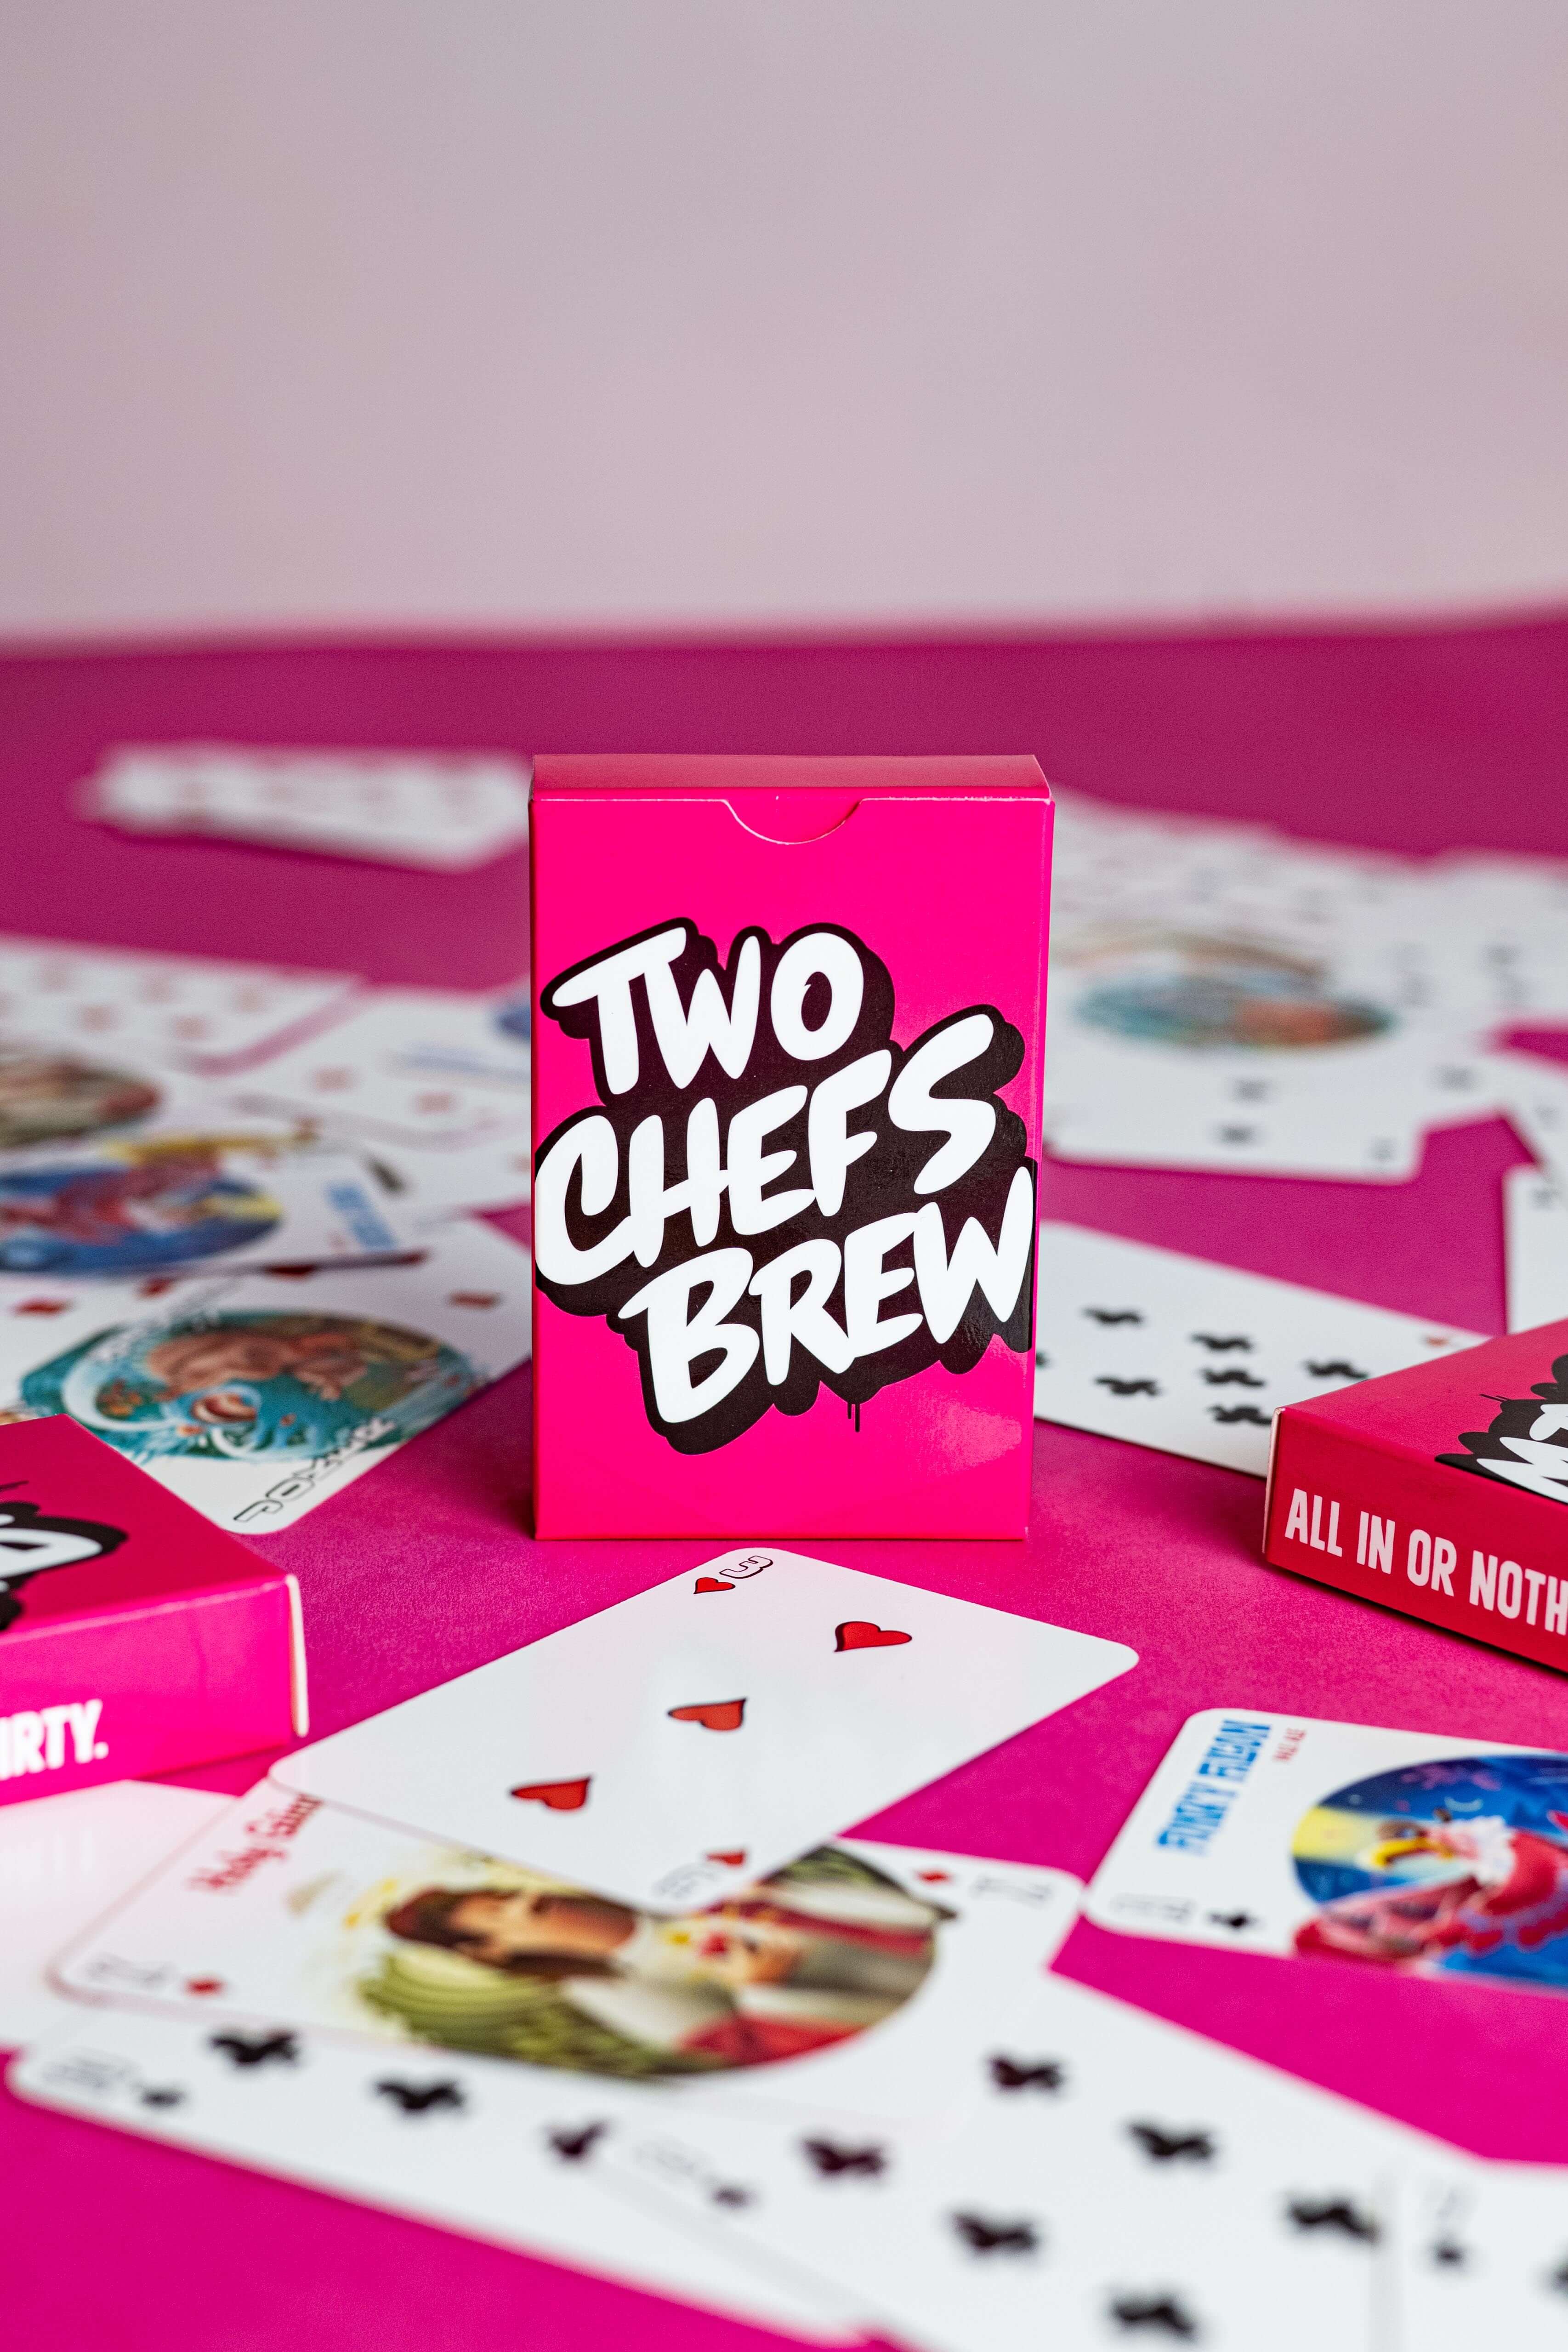 Two Chefs Brewing Deck of Cards